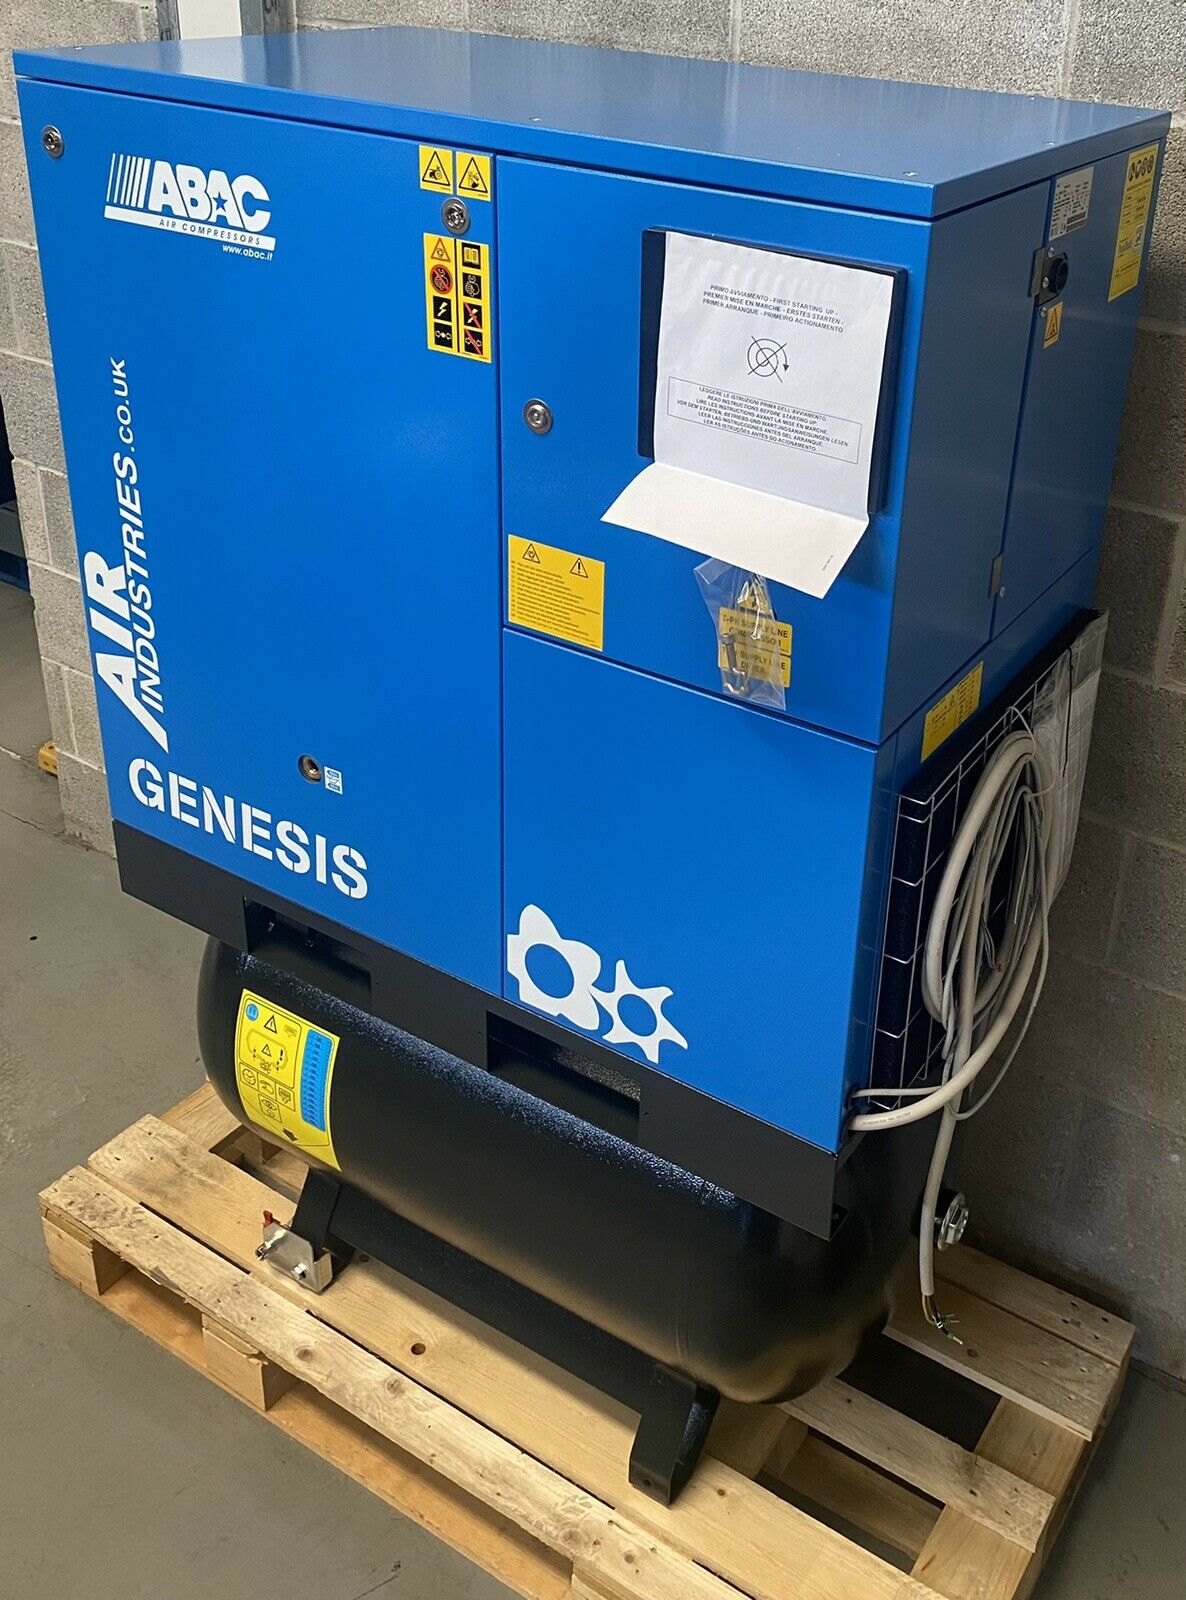 ABAC Genesis 11 Receiver Mounted Rotary Screw Compressor + Dryer + Filter (53CFM)